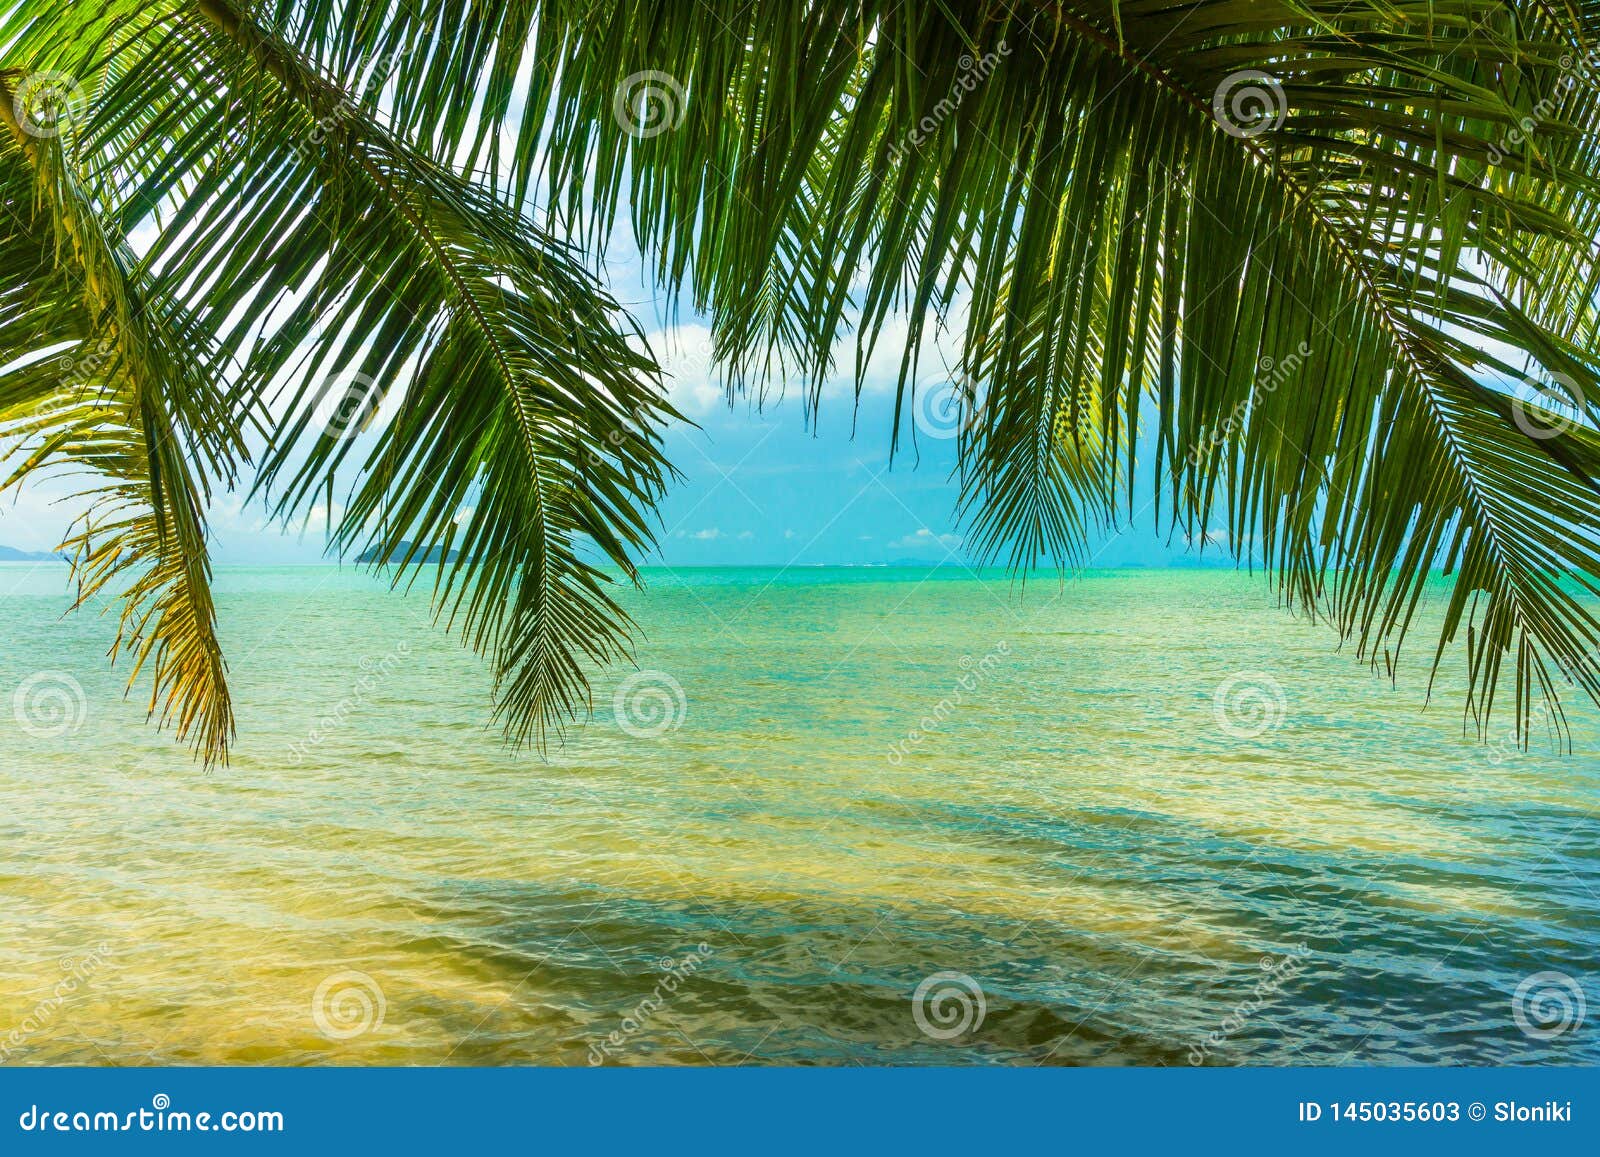 Sunny Tropical Beach Turquoise Thailand Sea With Palm Trees Stock